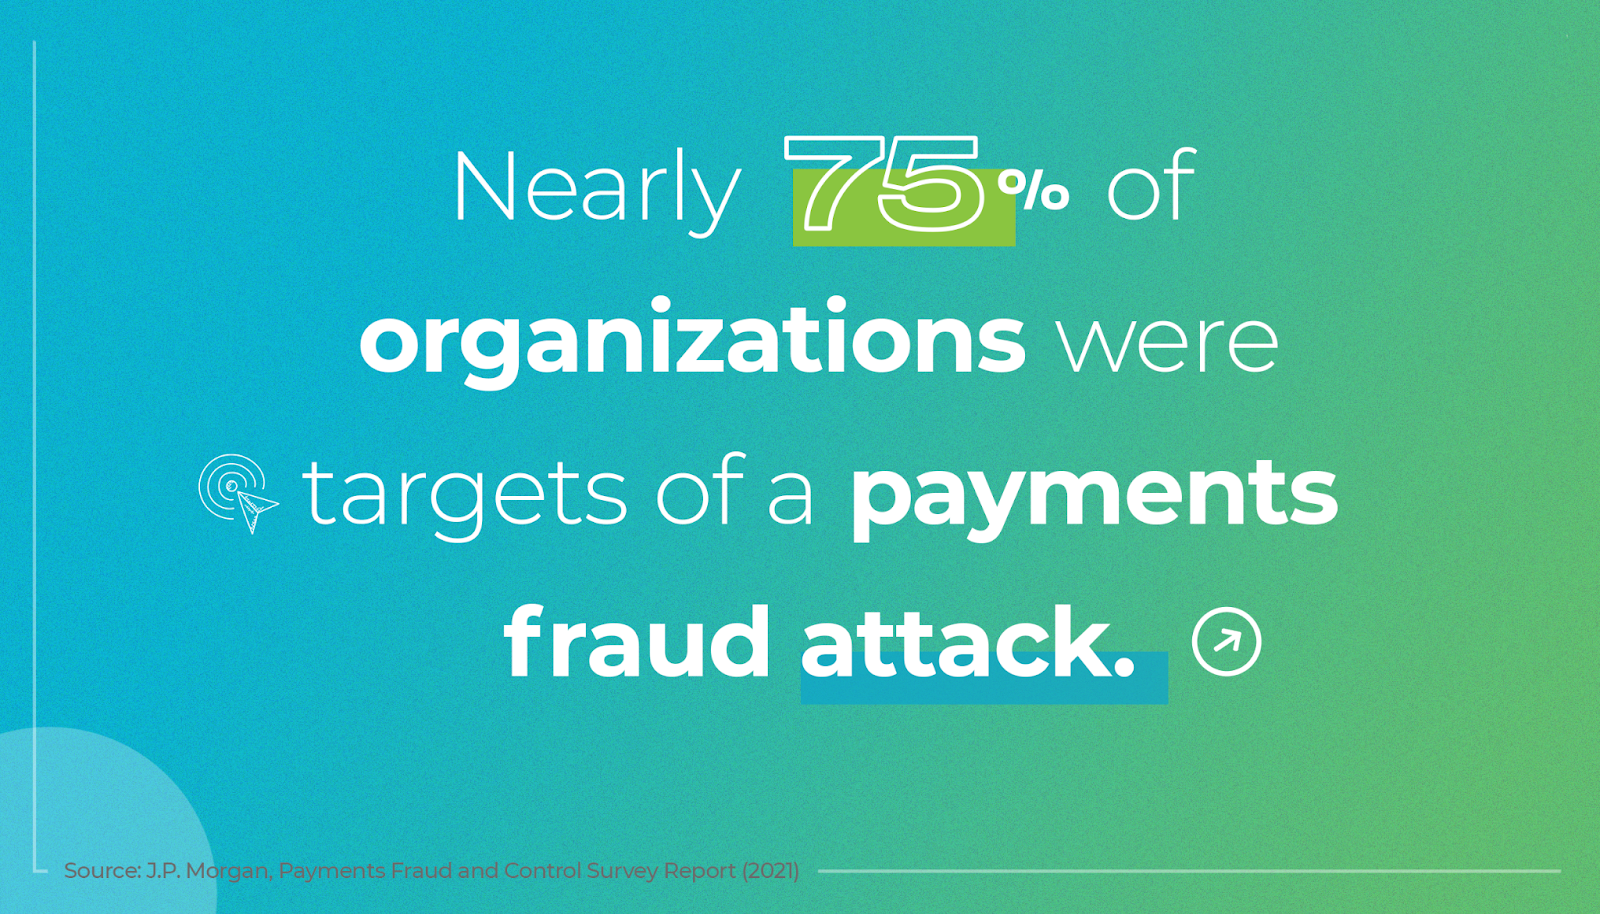 75% of organizations were targets of a payments fraud attack